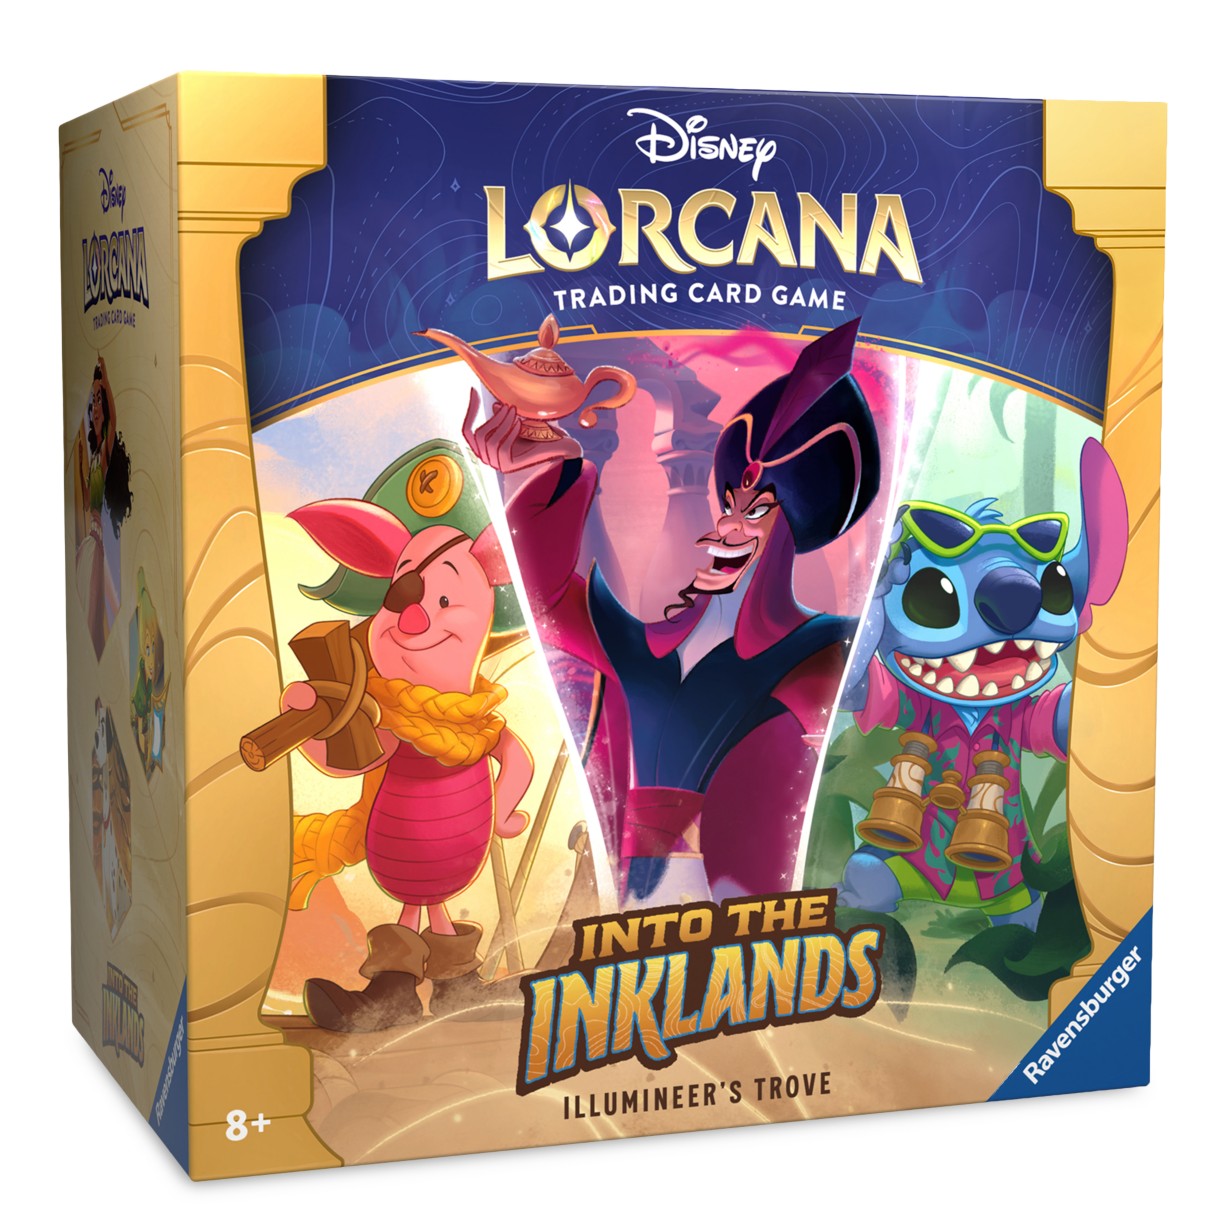 Disney Lorcana Trading Card Game by Ravensburger – Into the Inklands – Illumineer's Trove